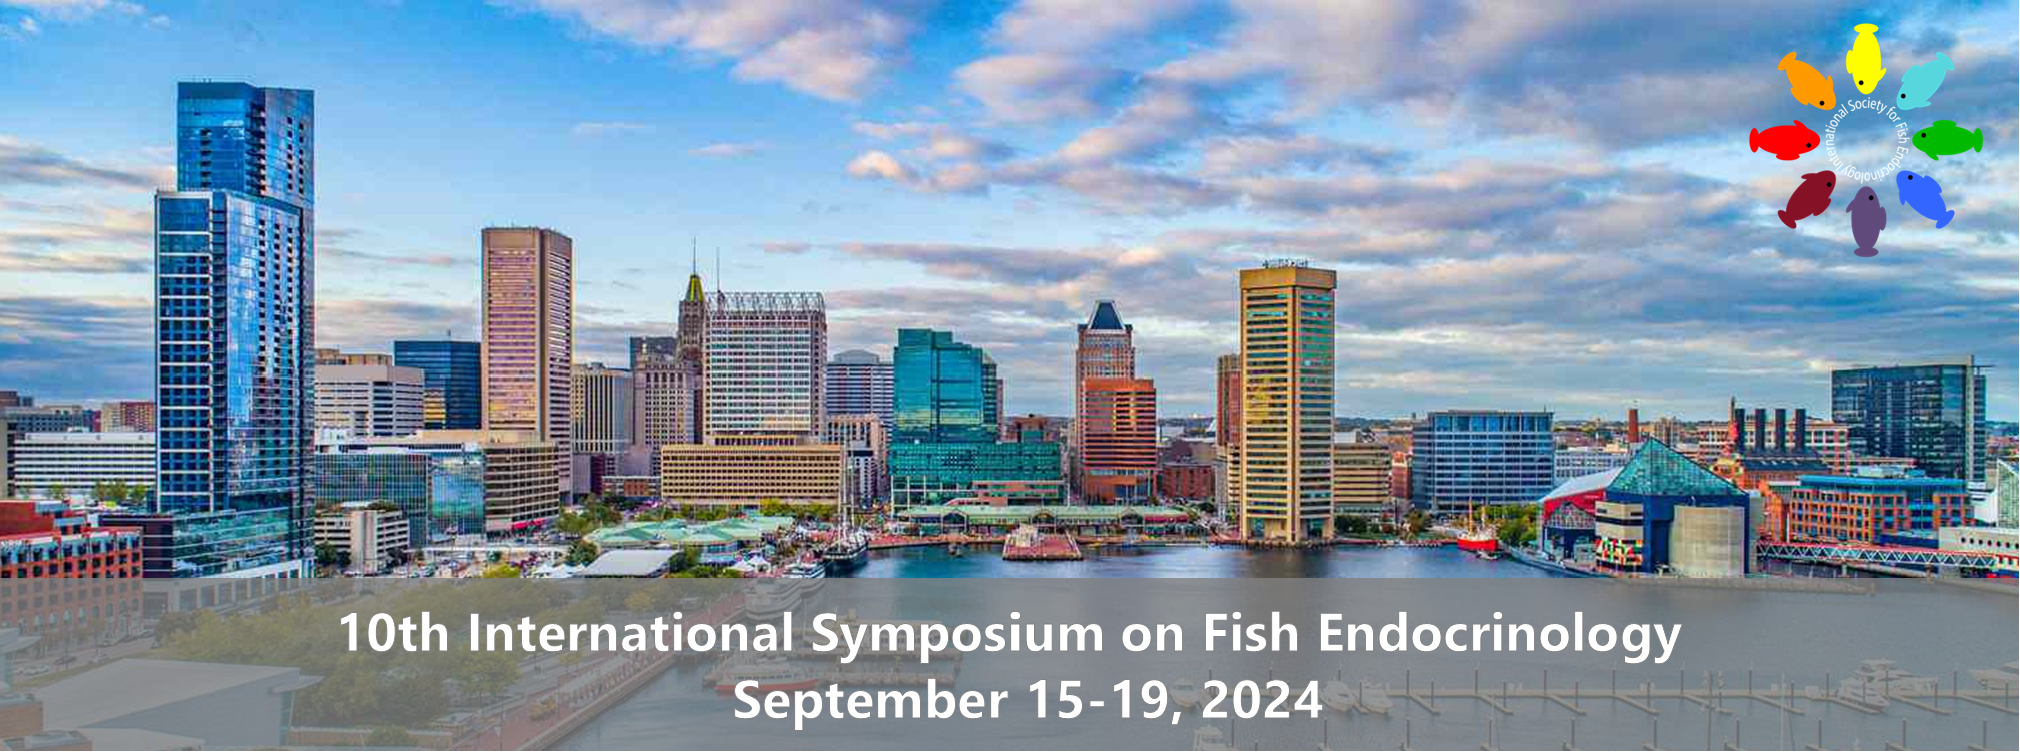 ISFE Conference Header - Baltimore Inner Harbor with the Marketplace as the focal point